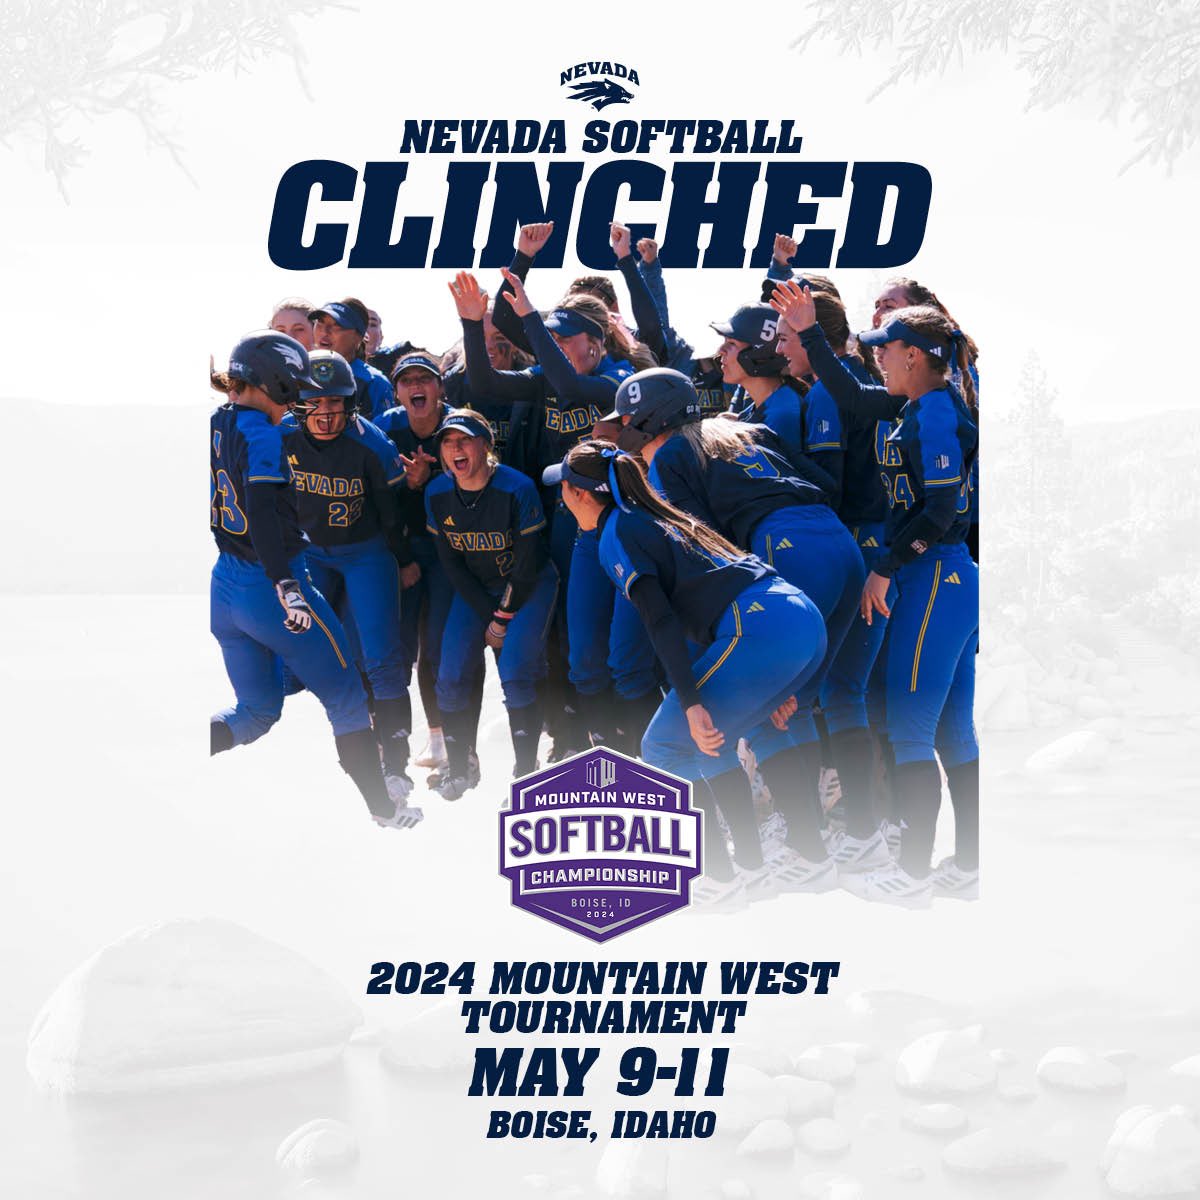 See you all in Boise🫡 The Pack has clinched a spot in the 2024 @MountainWest Tournament. #BattleBorn